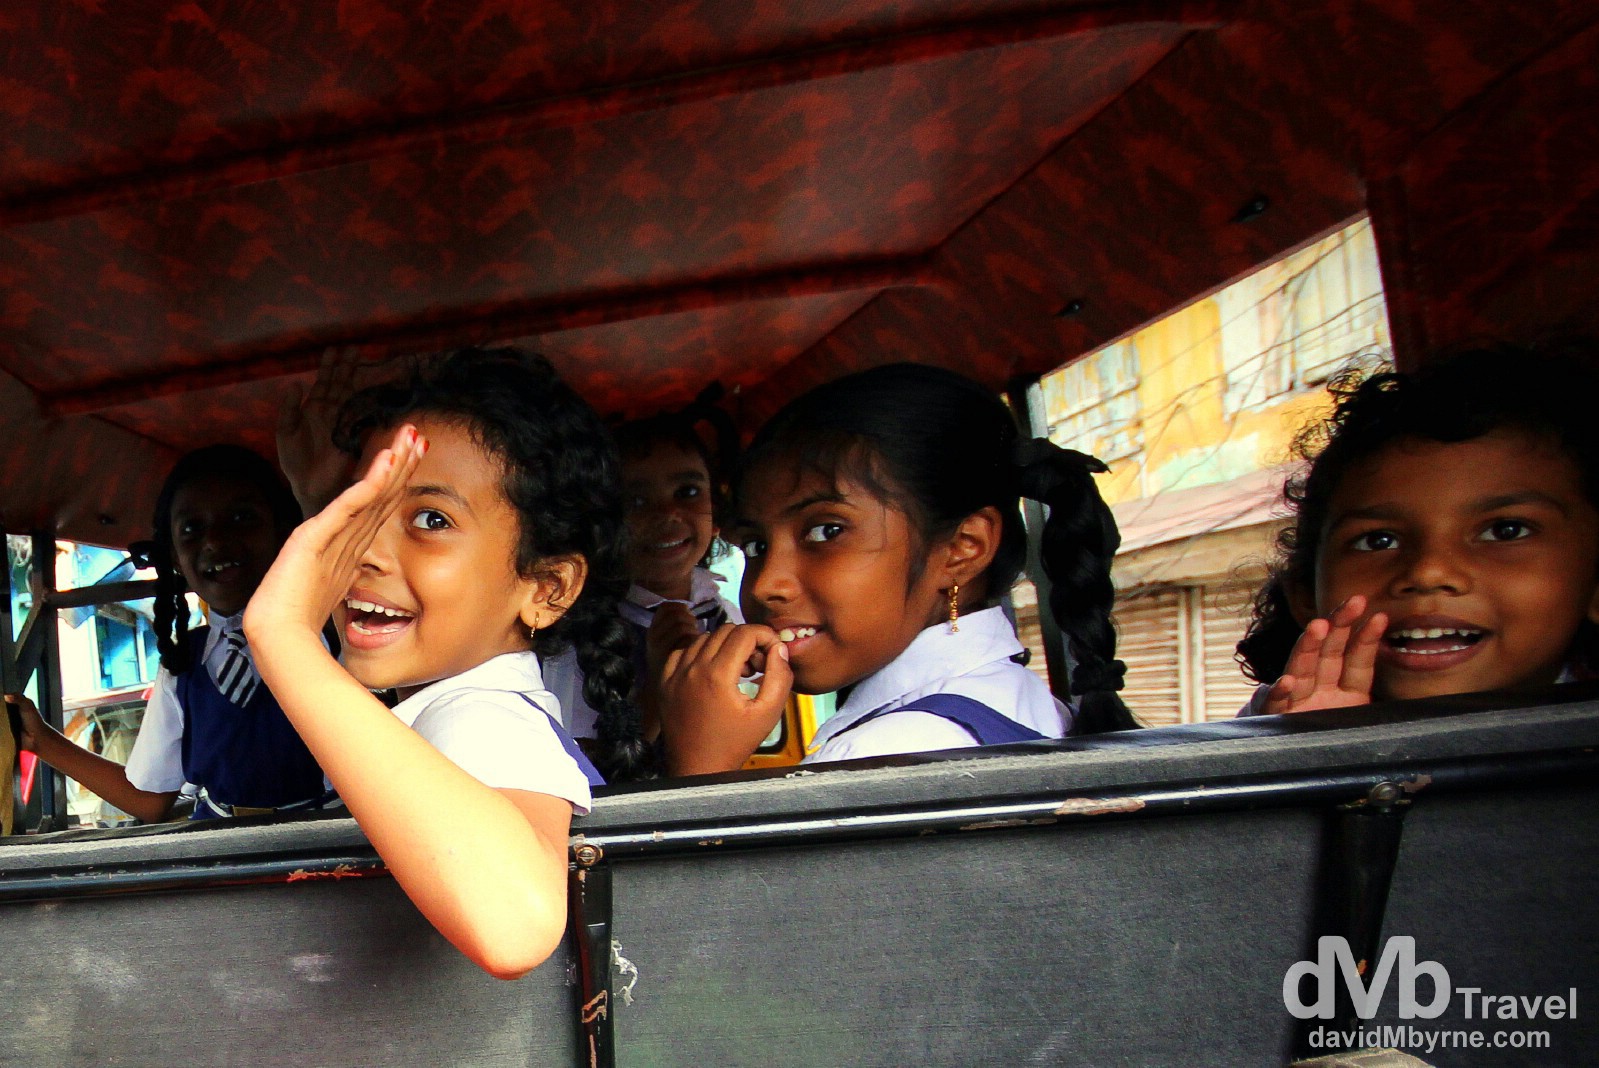 Smiles & waves out the back of a tuk tuk on Bazaar Road in Forth Cochin, Kerala, India. September 18th 2012.